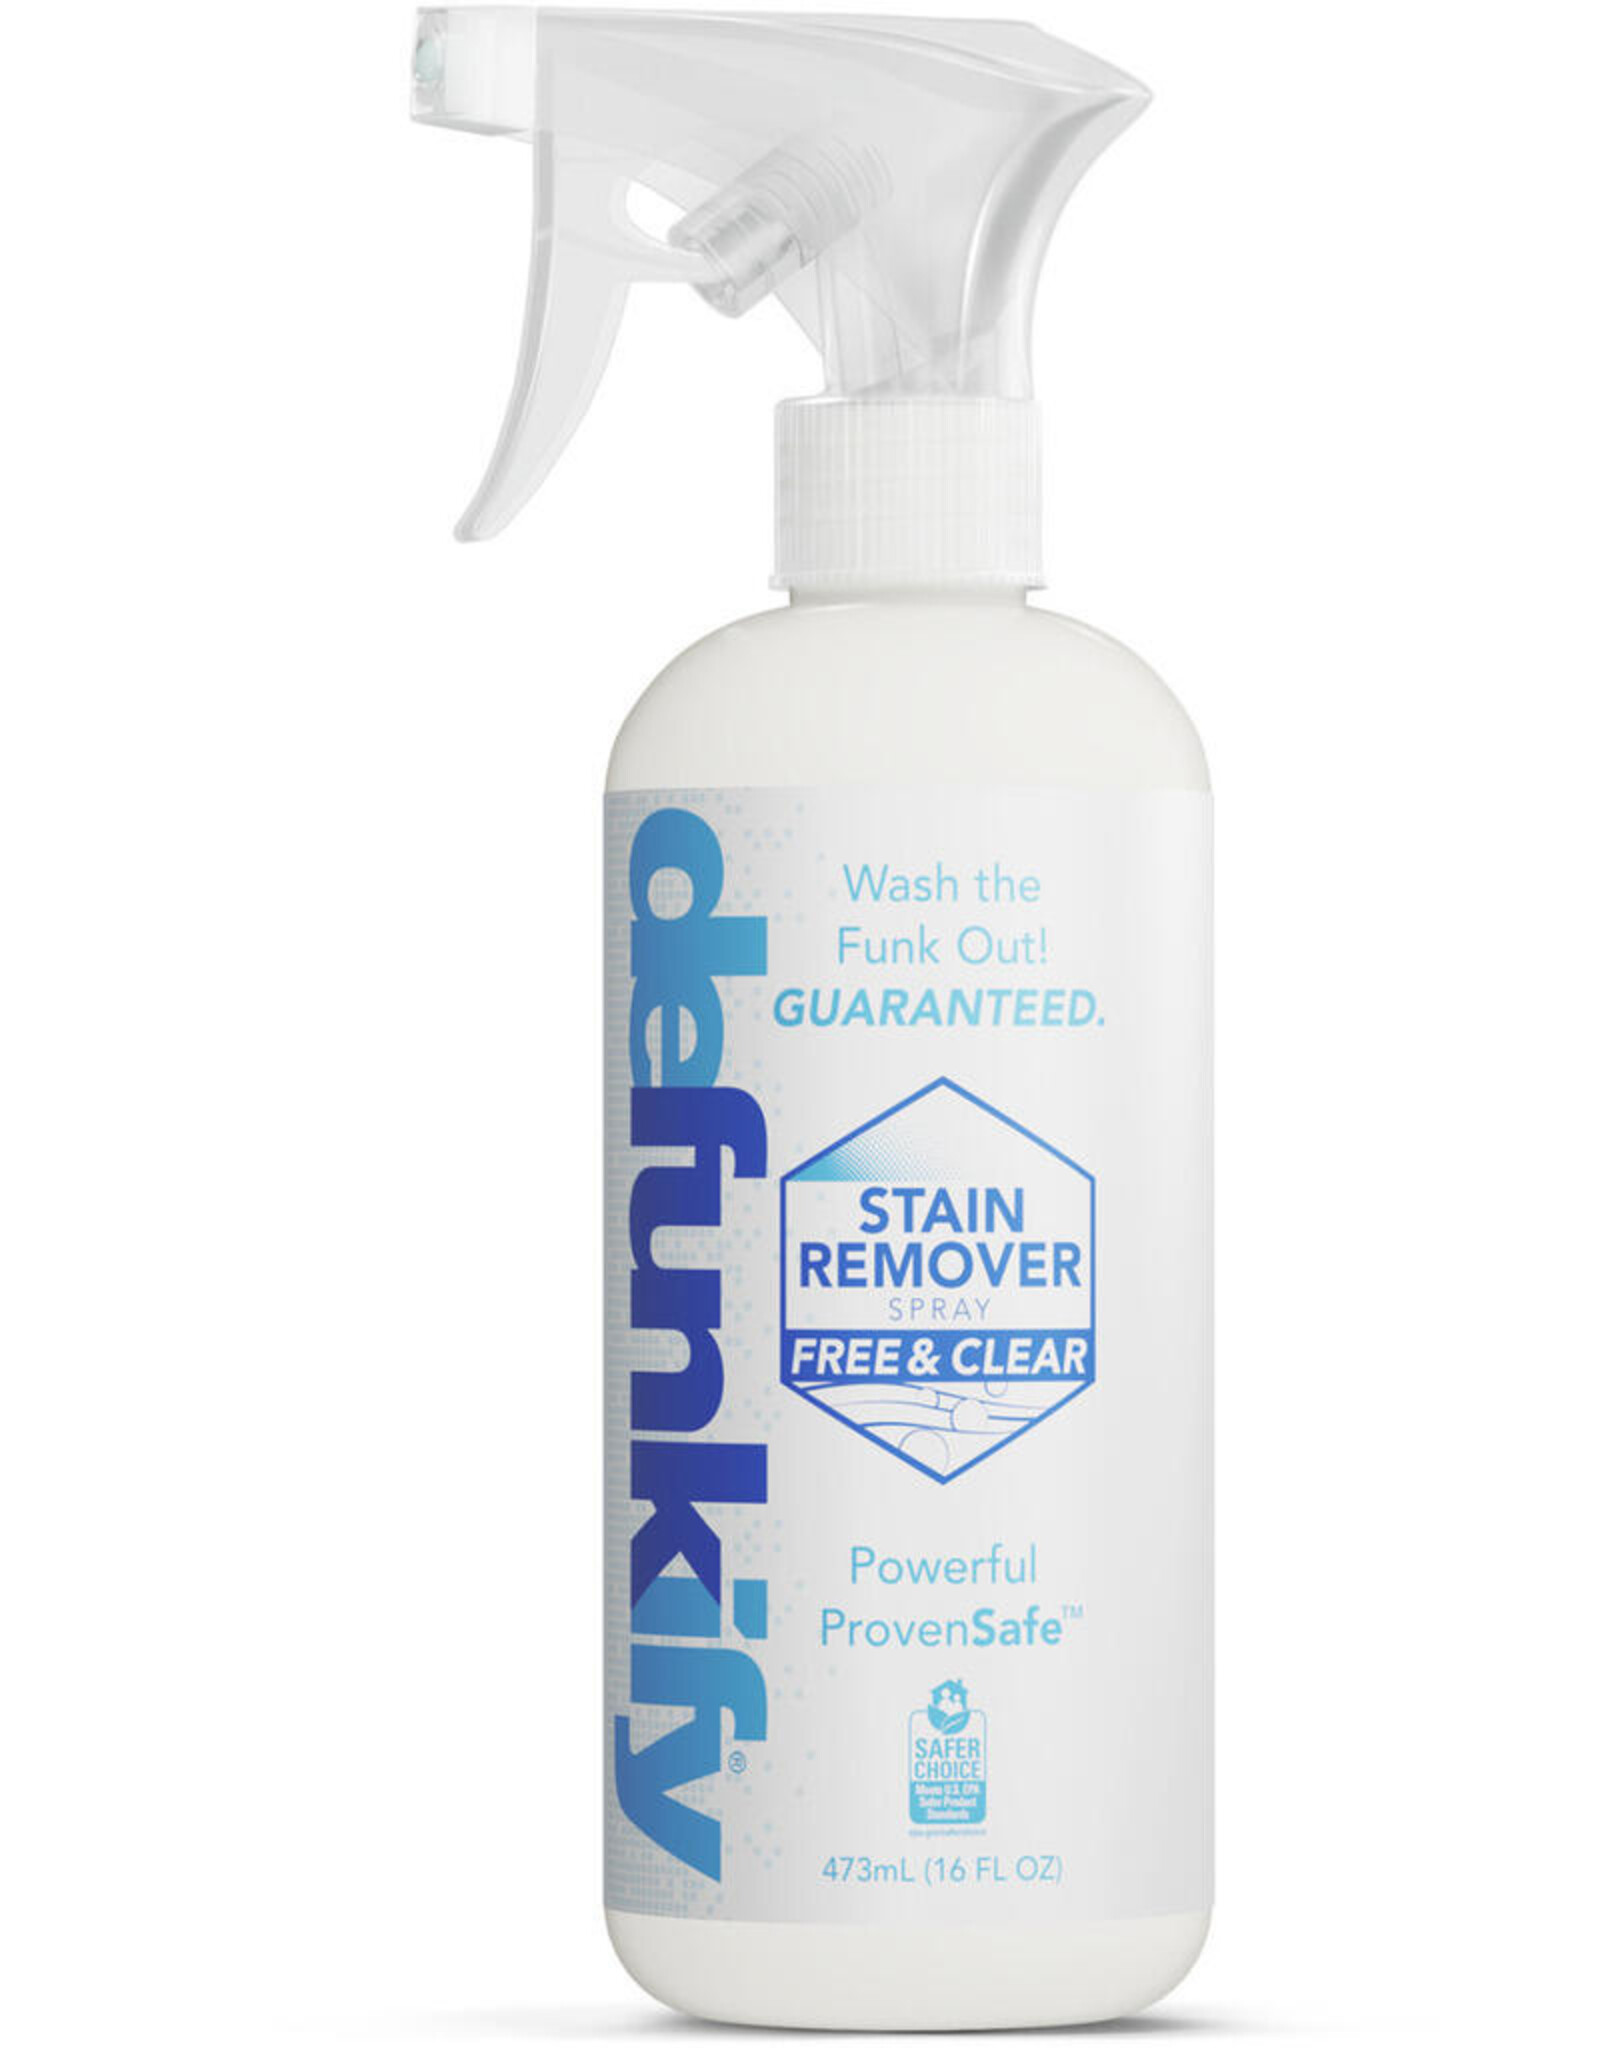 DEFUNKIT Stain Remover Spray